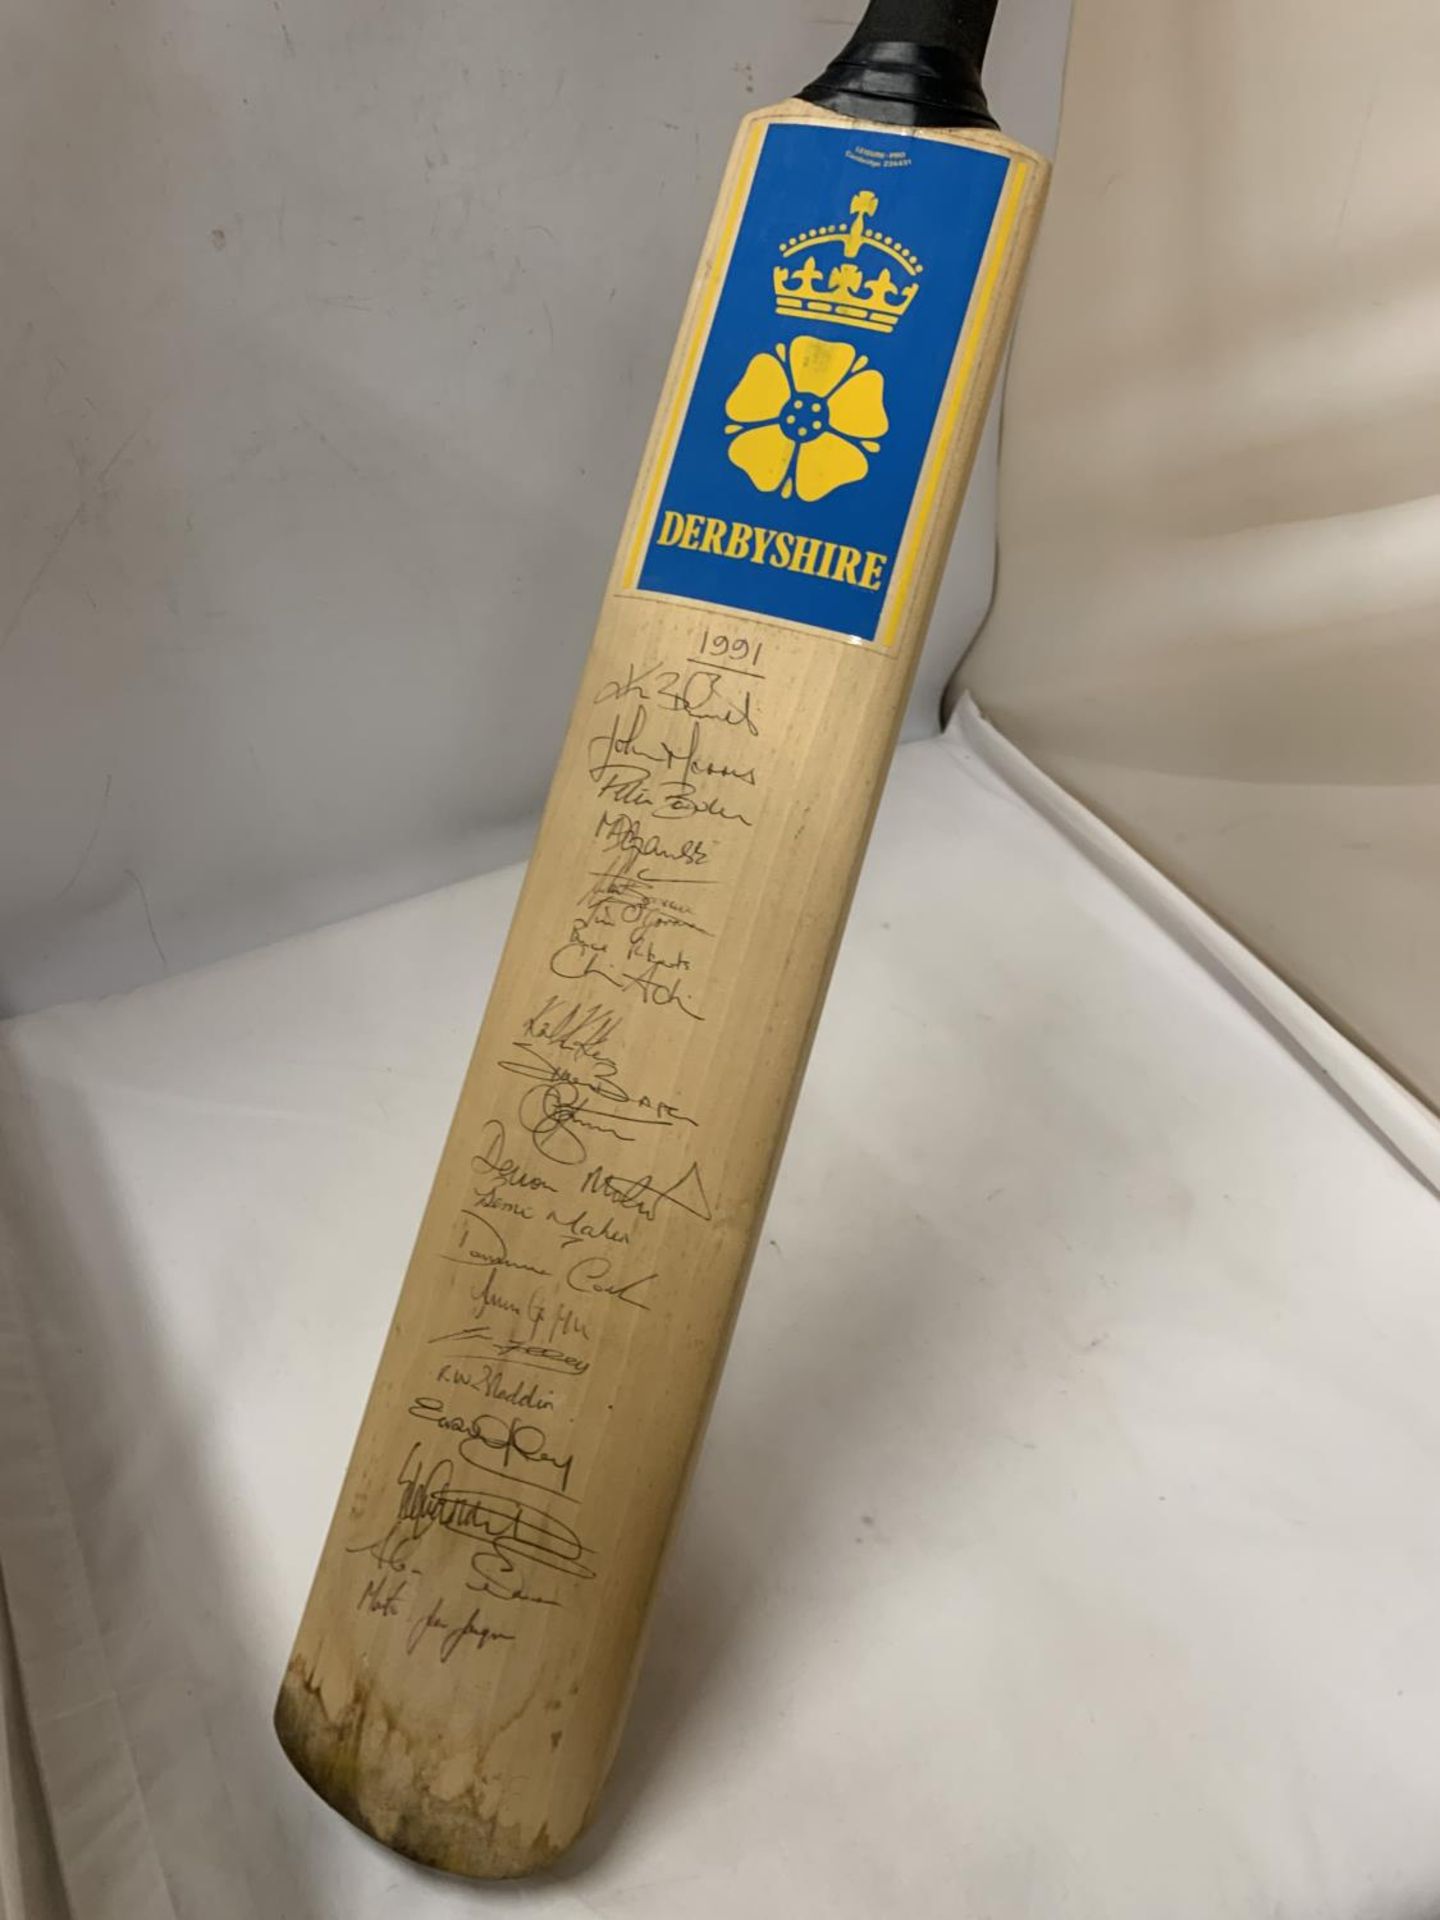 A DERBYSHIRE CRICKET CLUB BAT. SIGNED BY PLAYERS IN THE 1991 TEAM, TO ICLUDE DEVON MALCOLM, - Image 2 of 6